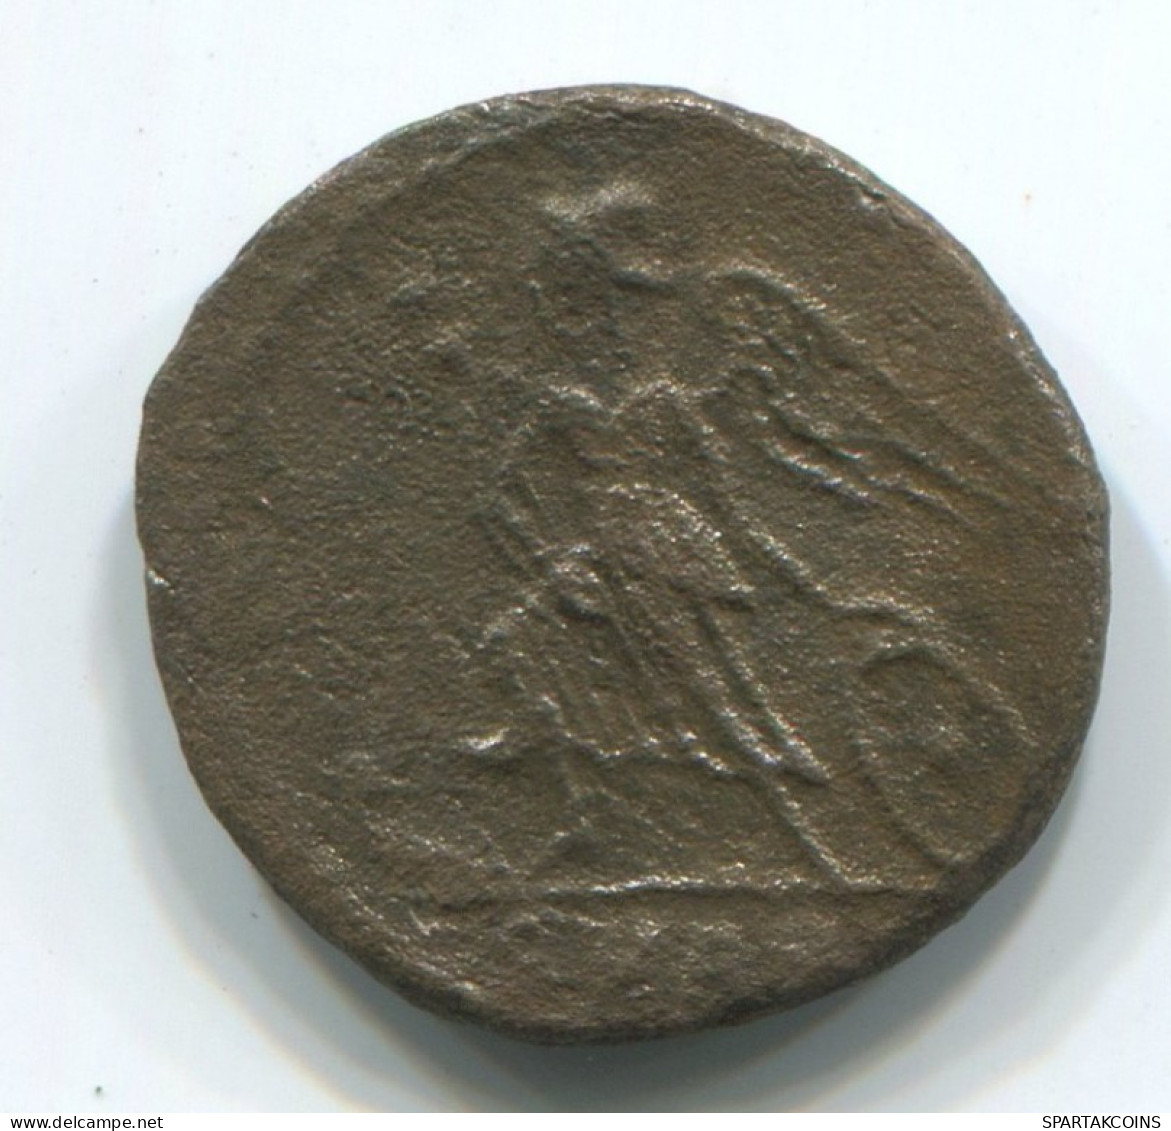 LATE ROMAN EMPIRE Pièce Antique Authentique Roman Pièce 1.4g/15mm #ANT2262.14.F.A - The End Of Empire (363 AD To 476 AD)